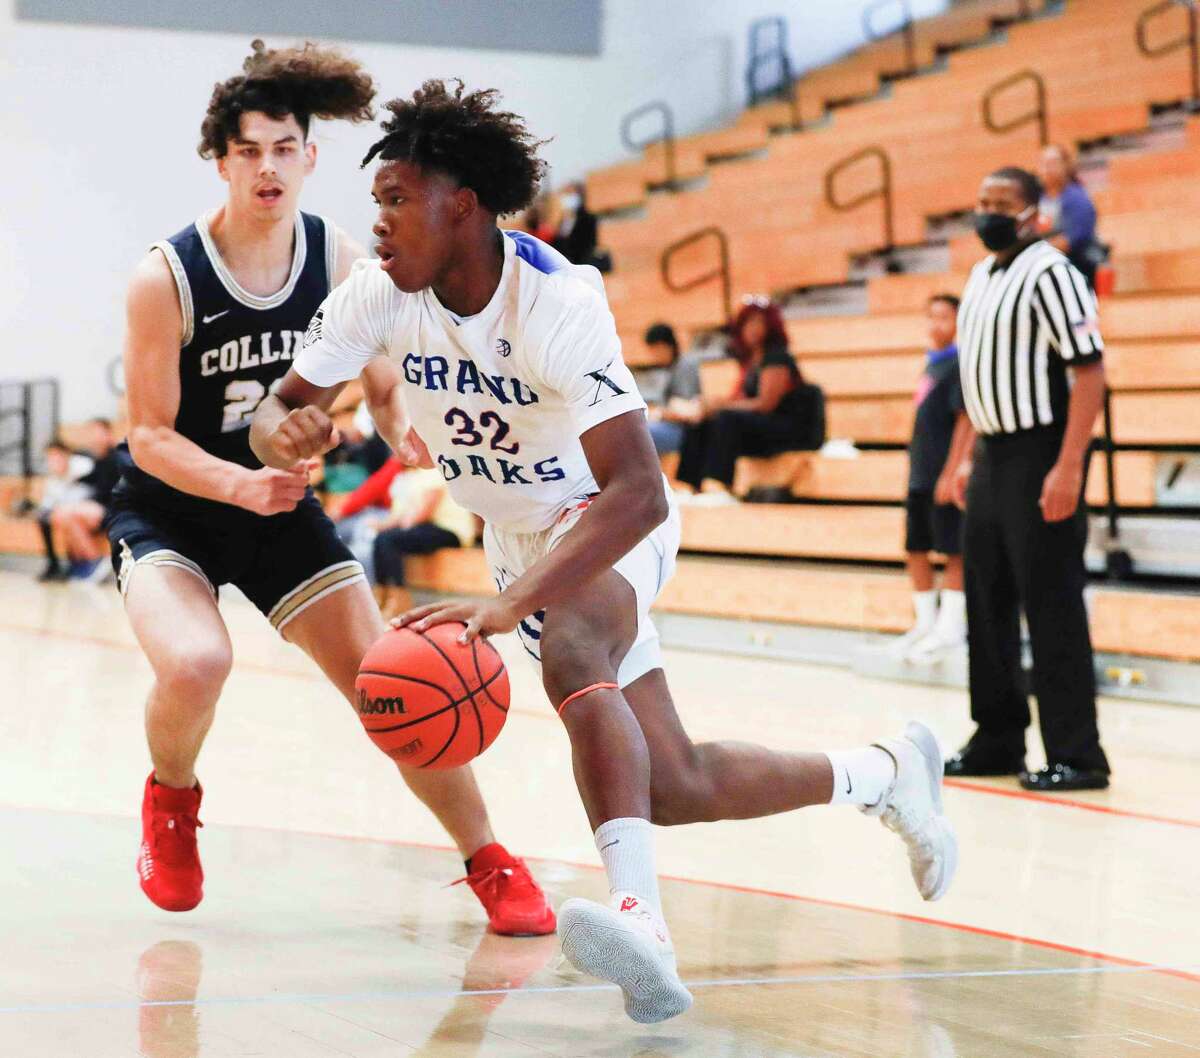 Grand Oaks forward Samuel Nkassa (32) dribbles the ball in the first quarter of a game during the Beast Up invitational at Grand Oaks High School, Saturday, Dec. 4, 2021, in Spring.